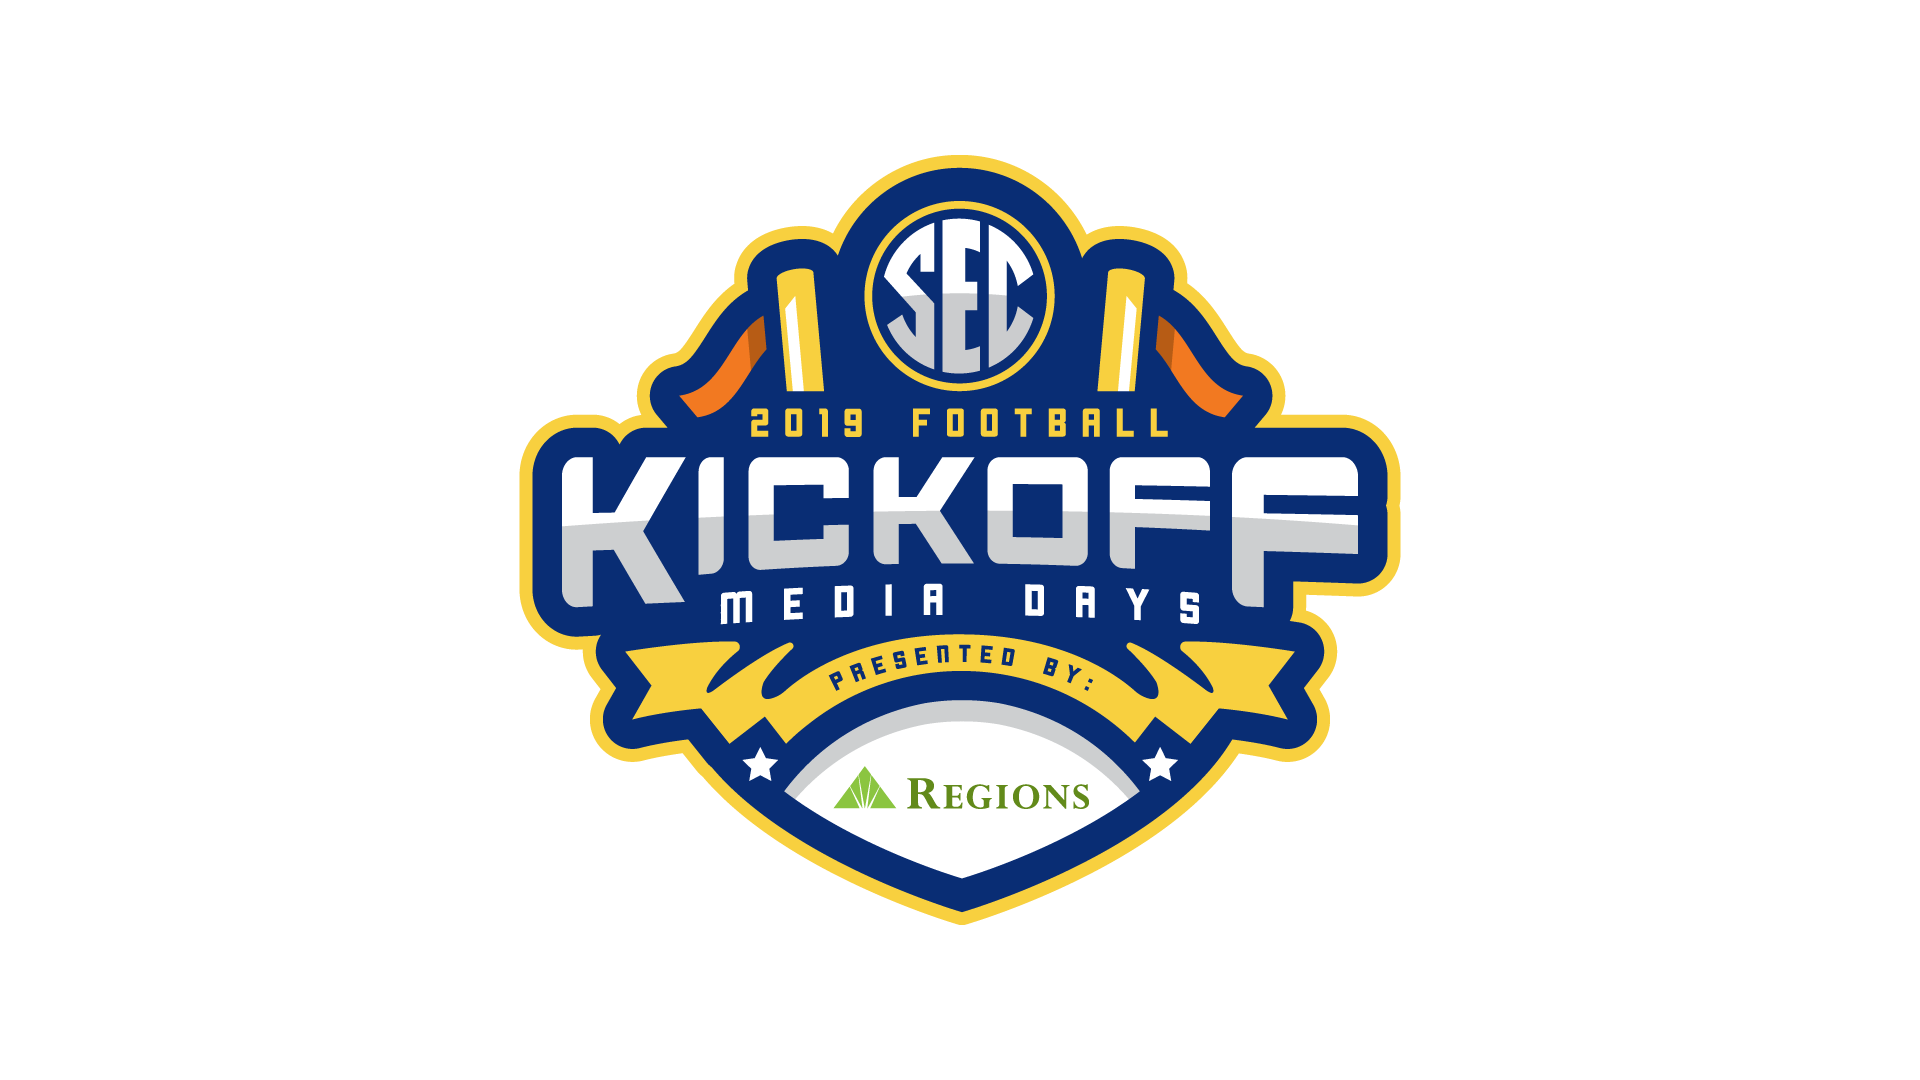  Day One of the 2019 SEC Media Days